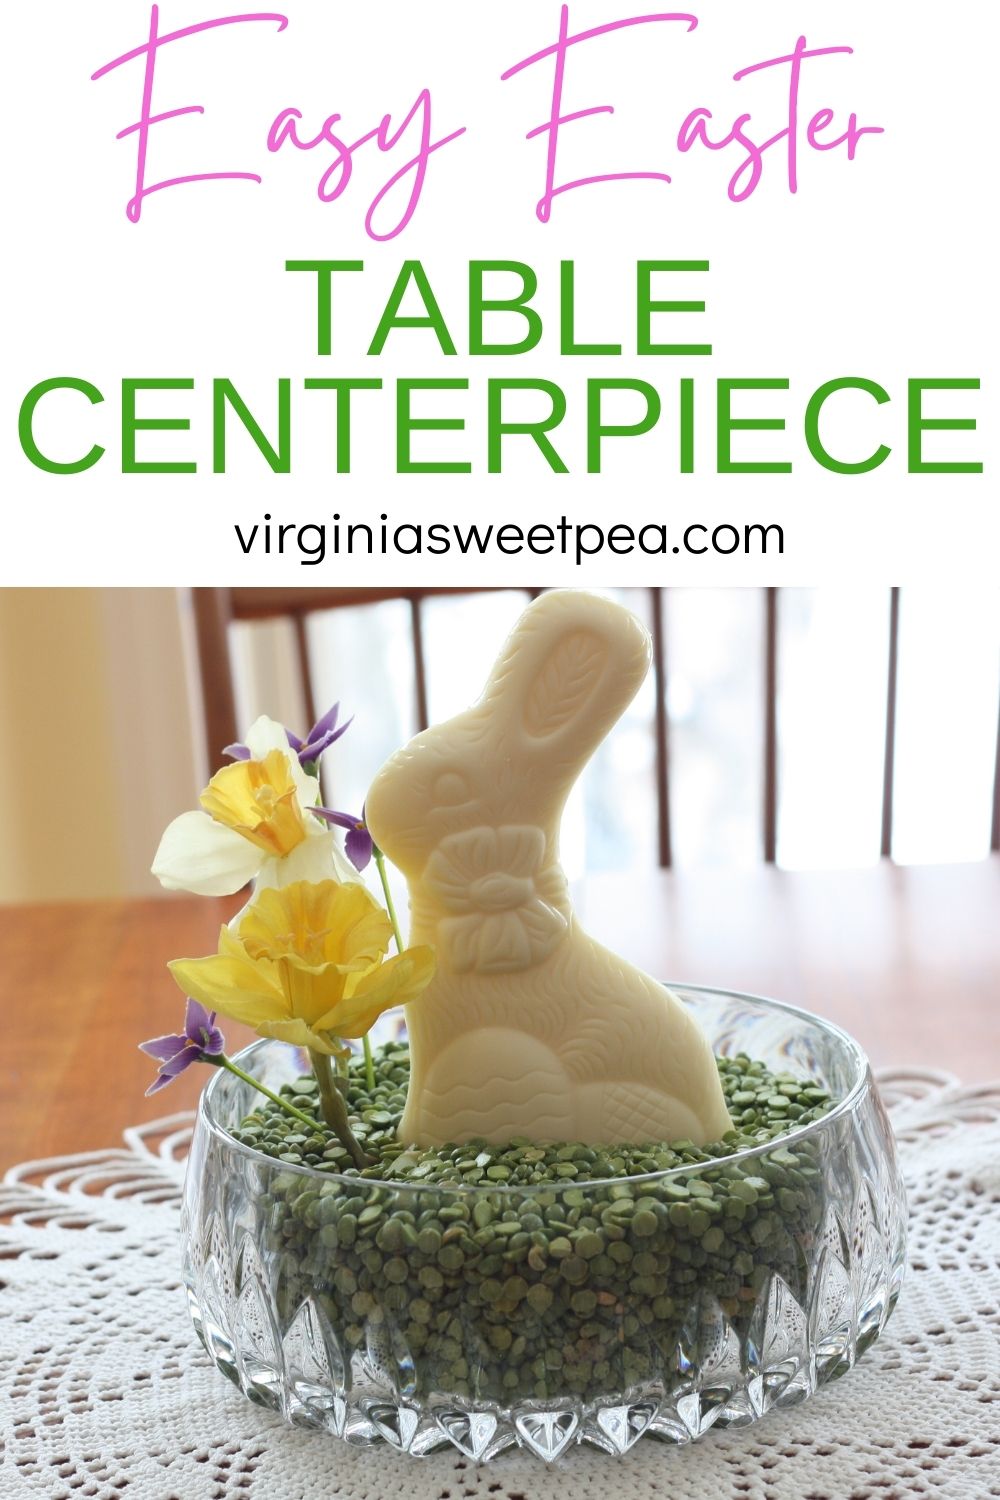 Easter centerpiece with a glass bowl filled with dried green split peas, a white chocolate rabbit, and faux daffodils.